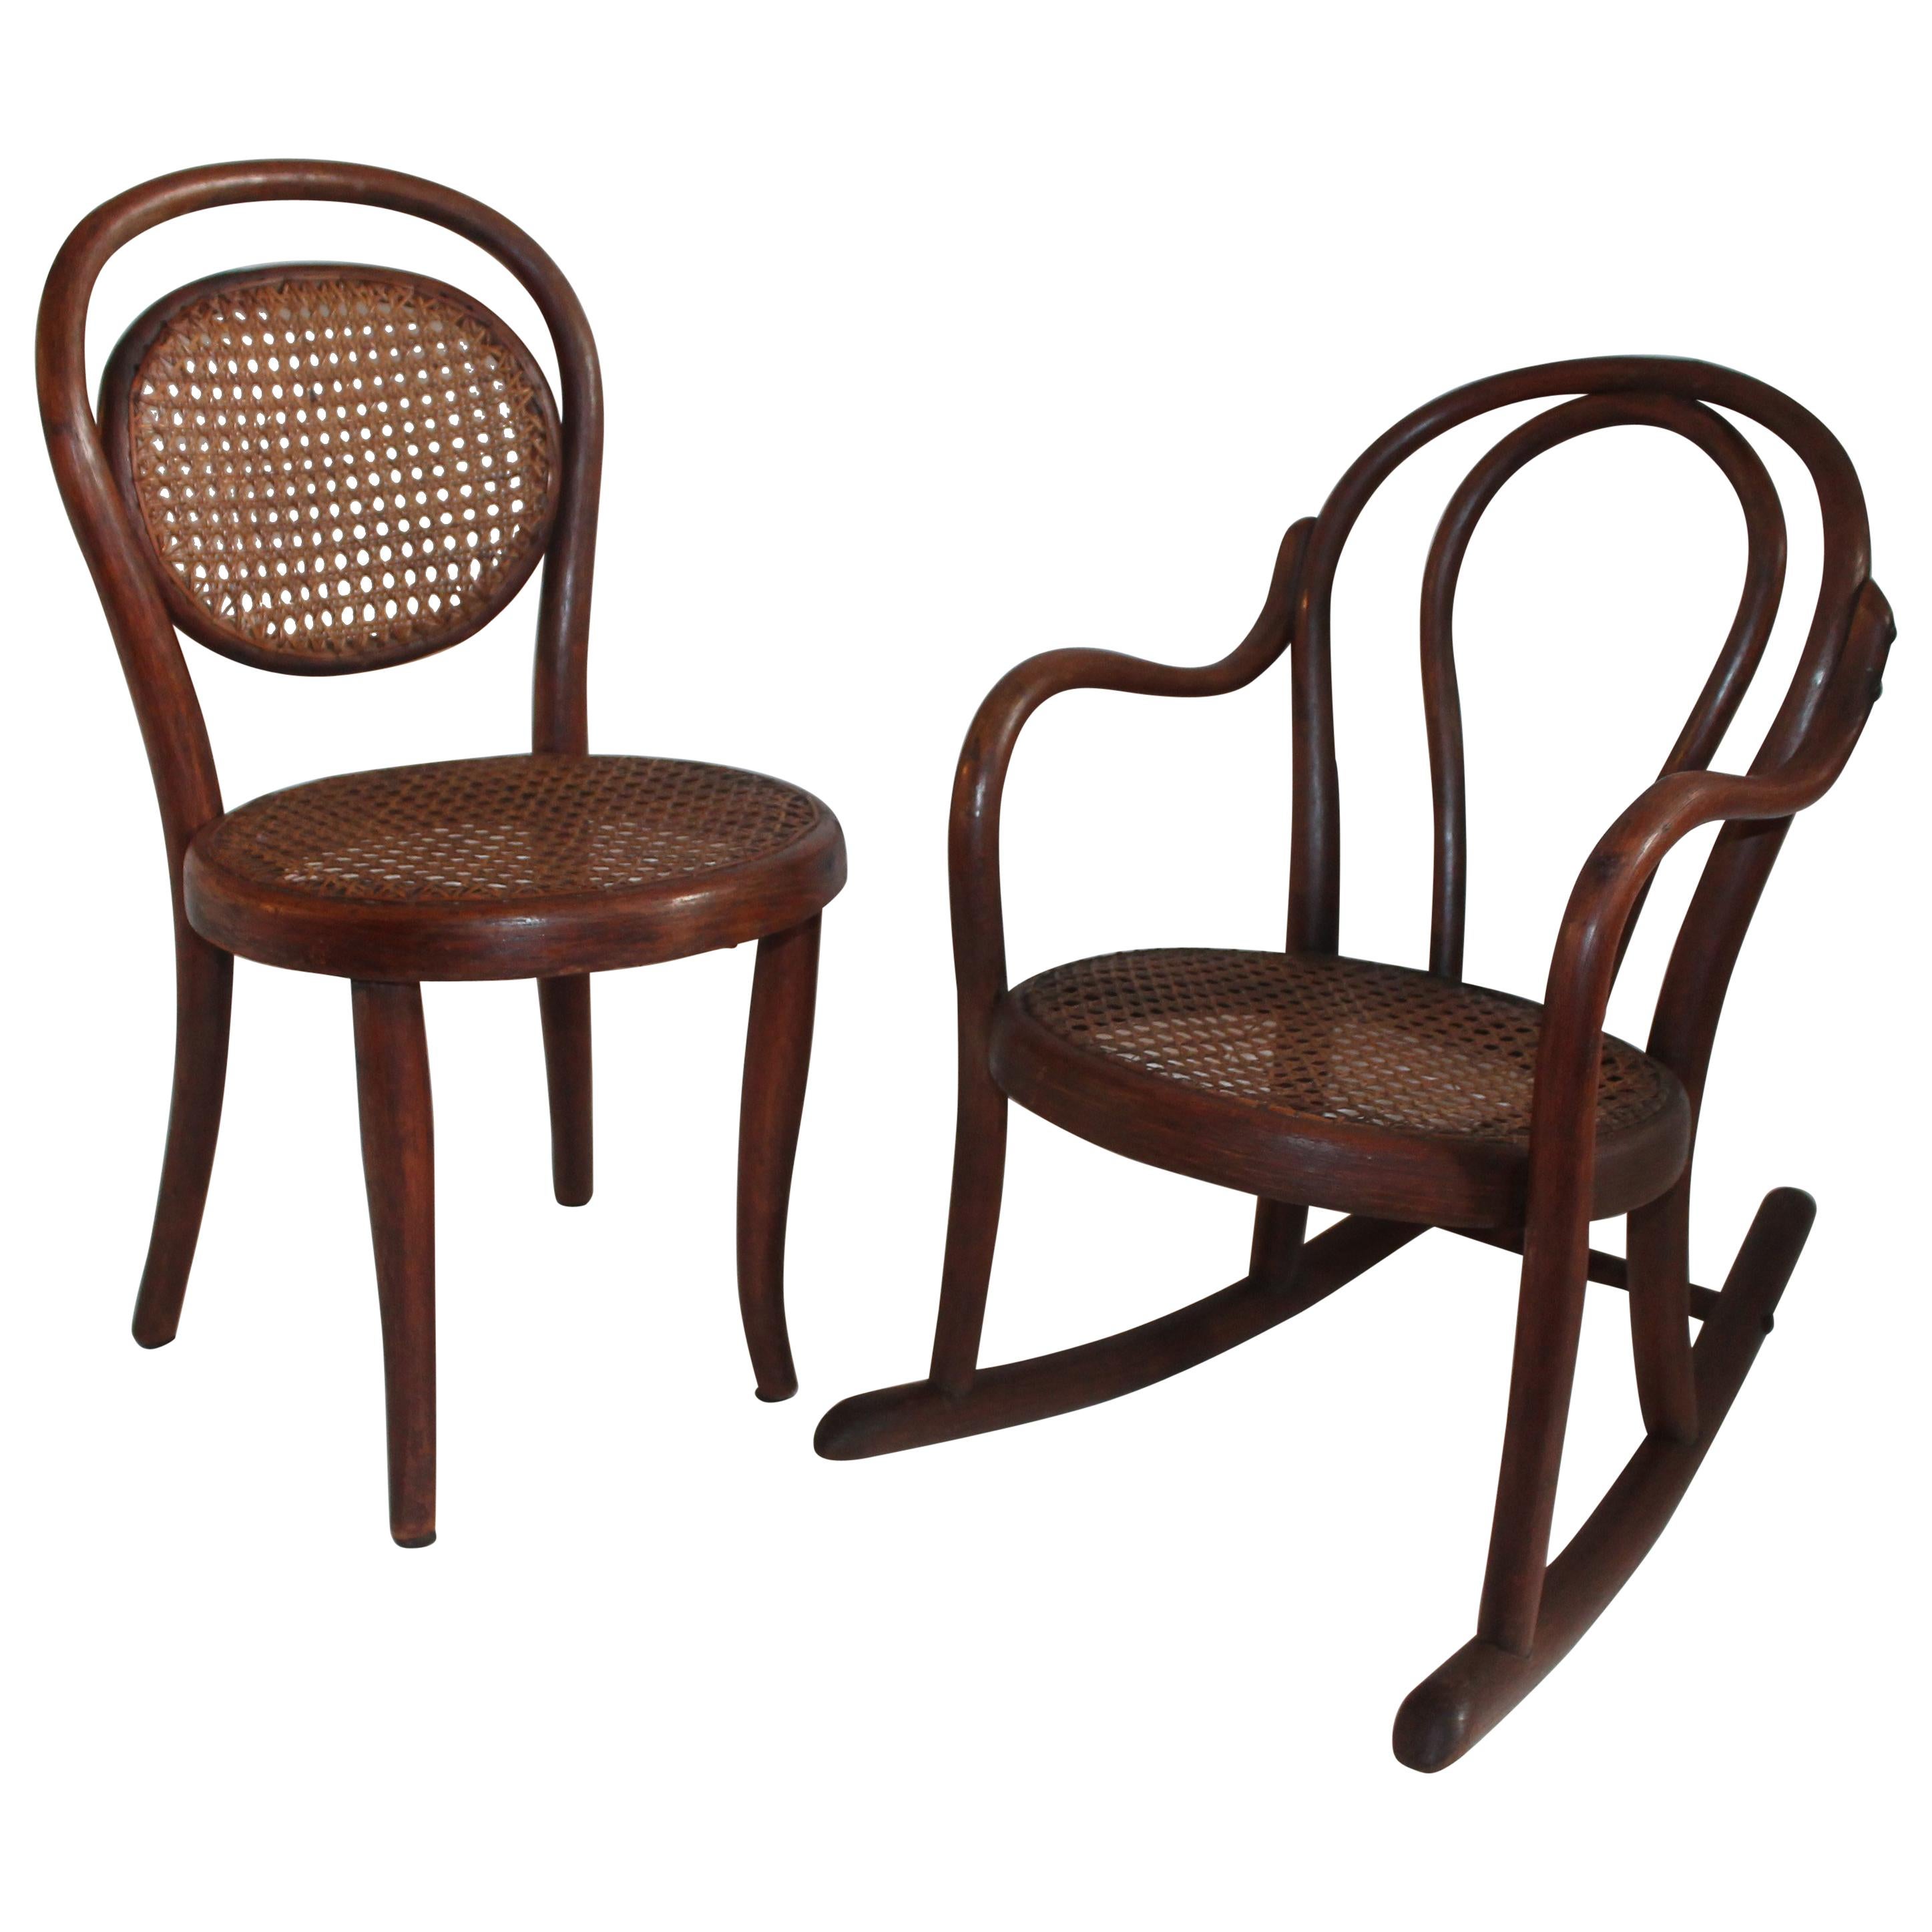 Bentwood Rocker and Chair with Cane Seats, 19th Century